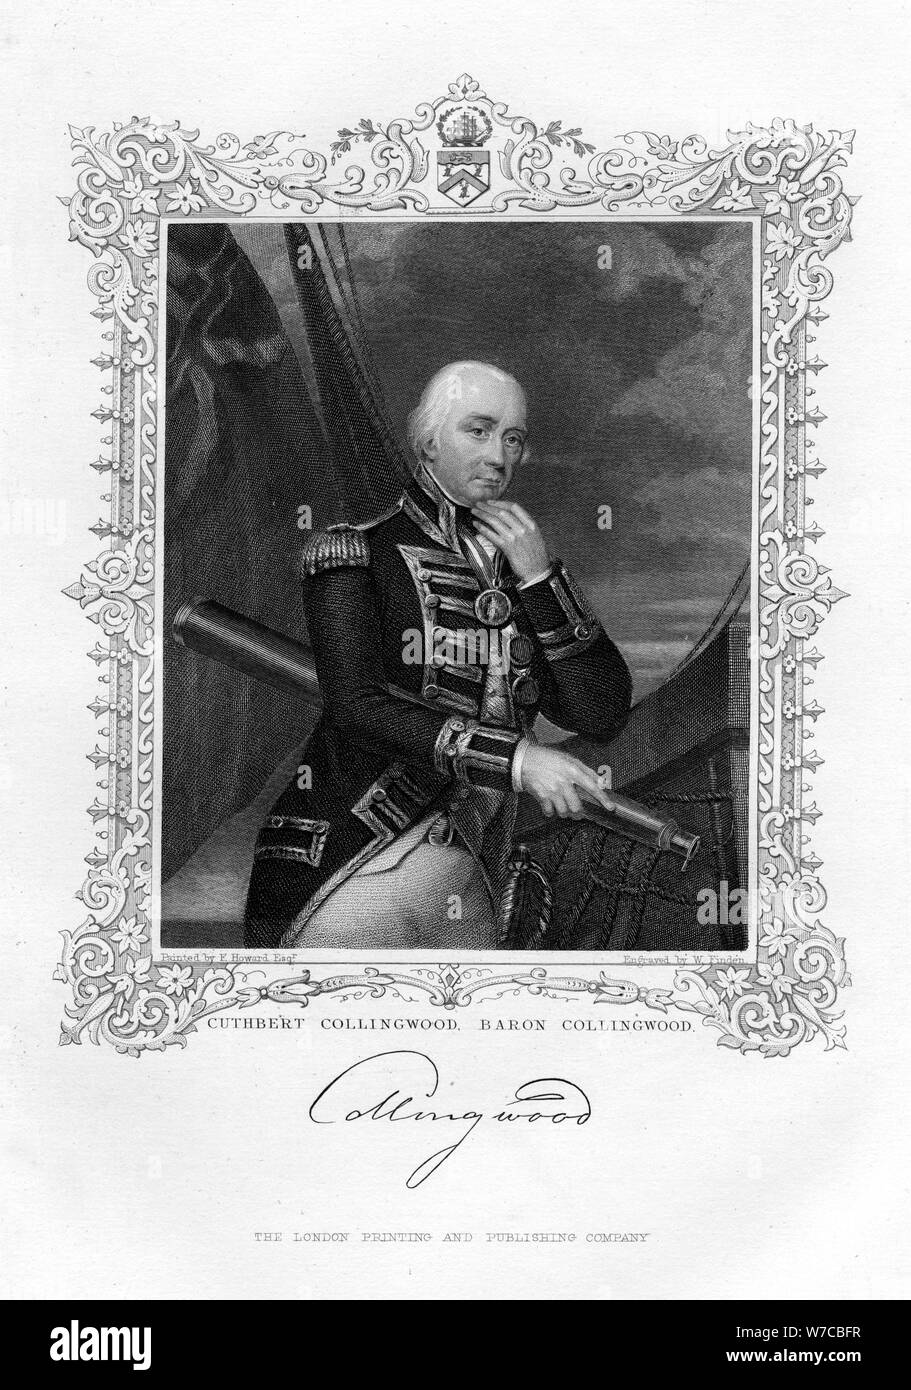 Cuthbert Collingwood, 1st Baron Collingwood, British admiral of the Royal Navy, 19th century.Artist: William Finden Stock Photo